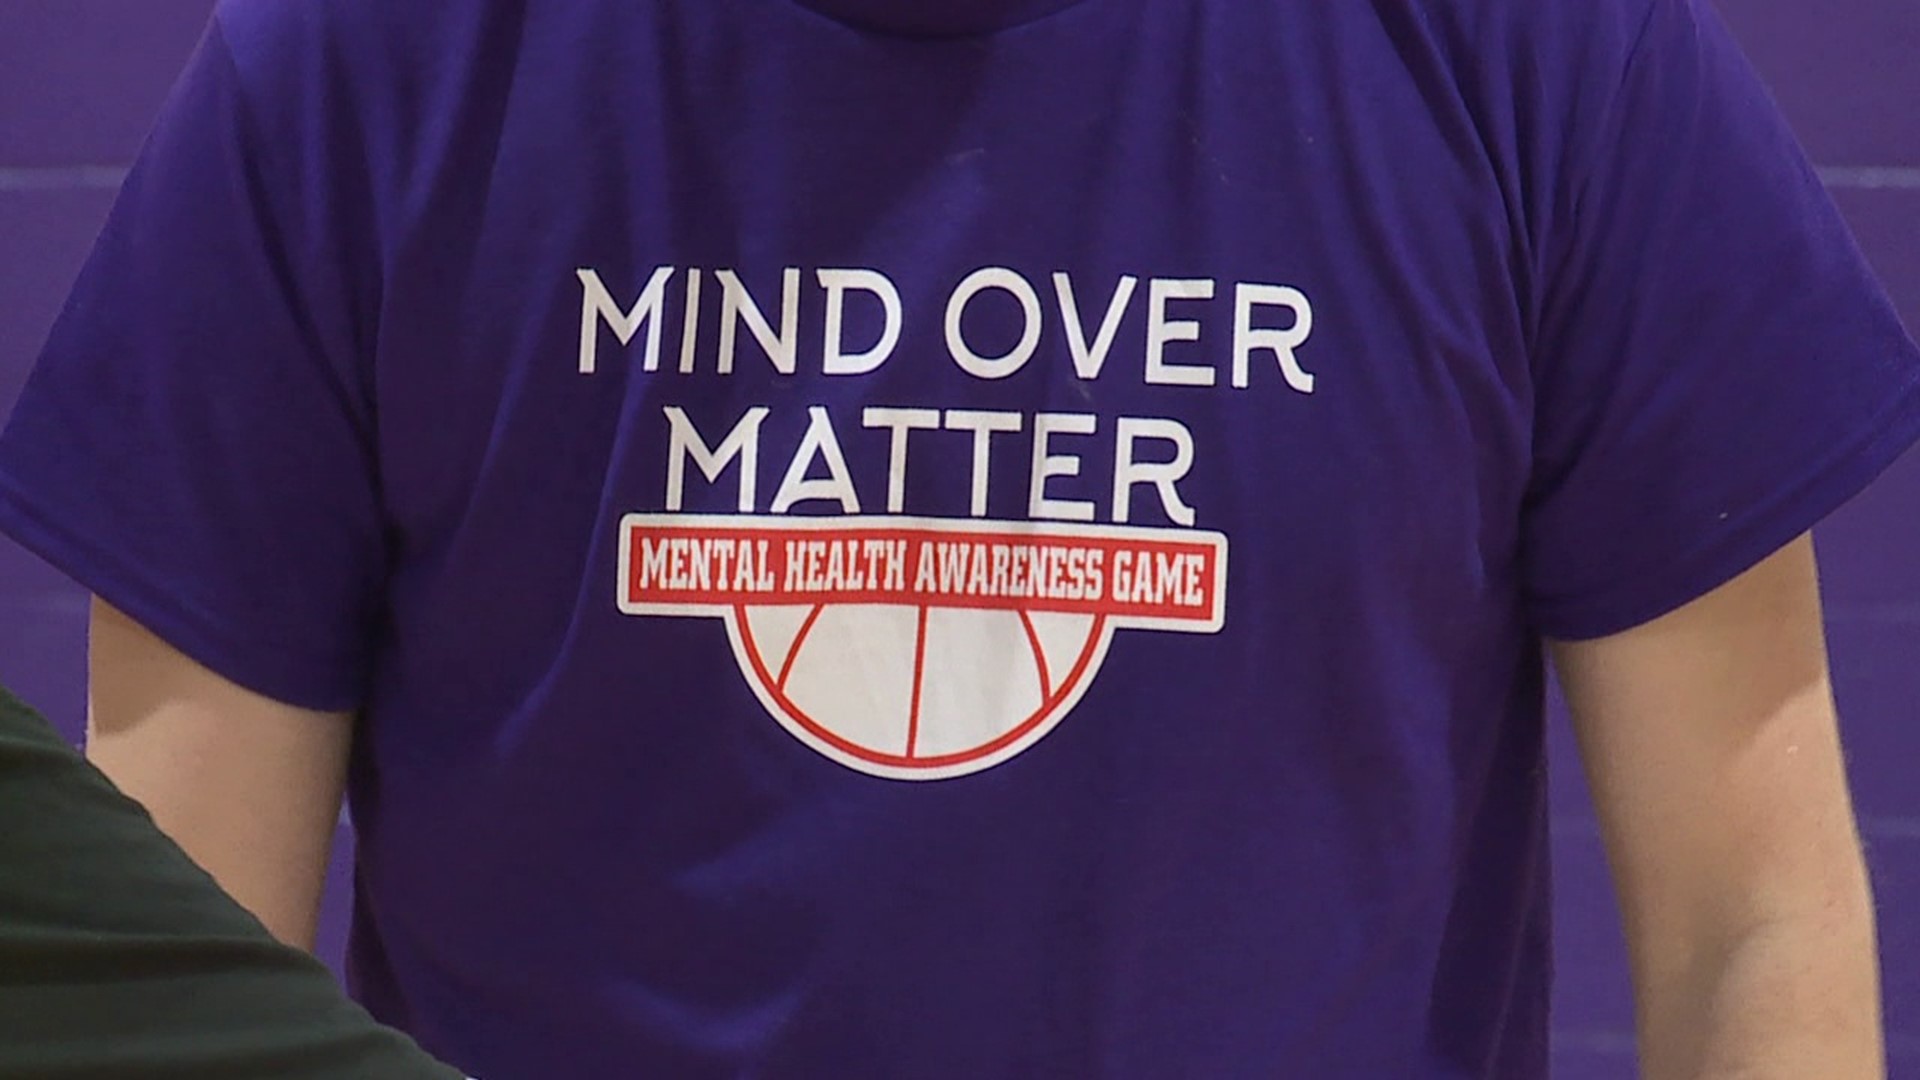 Newswatch 16's Emily Kress shows us how Danville Area School District is honoring classmates and raising awareness for mental health.